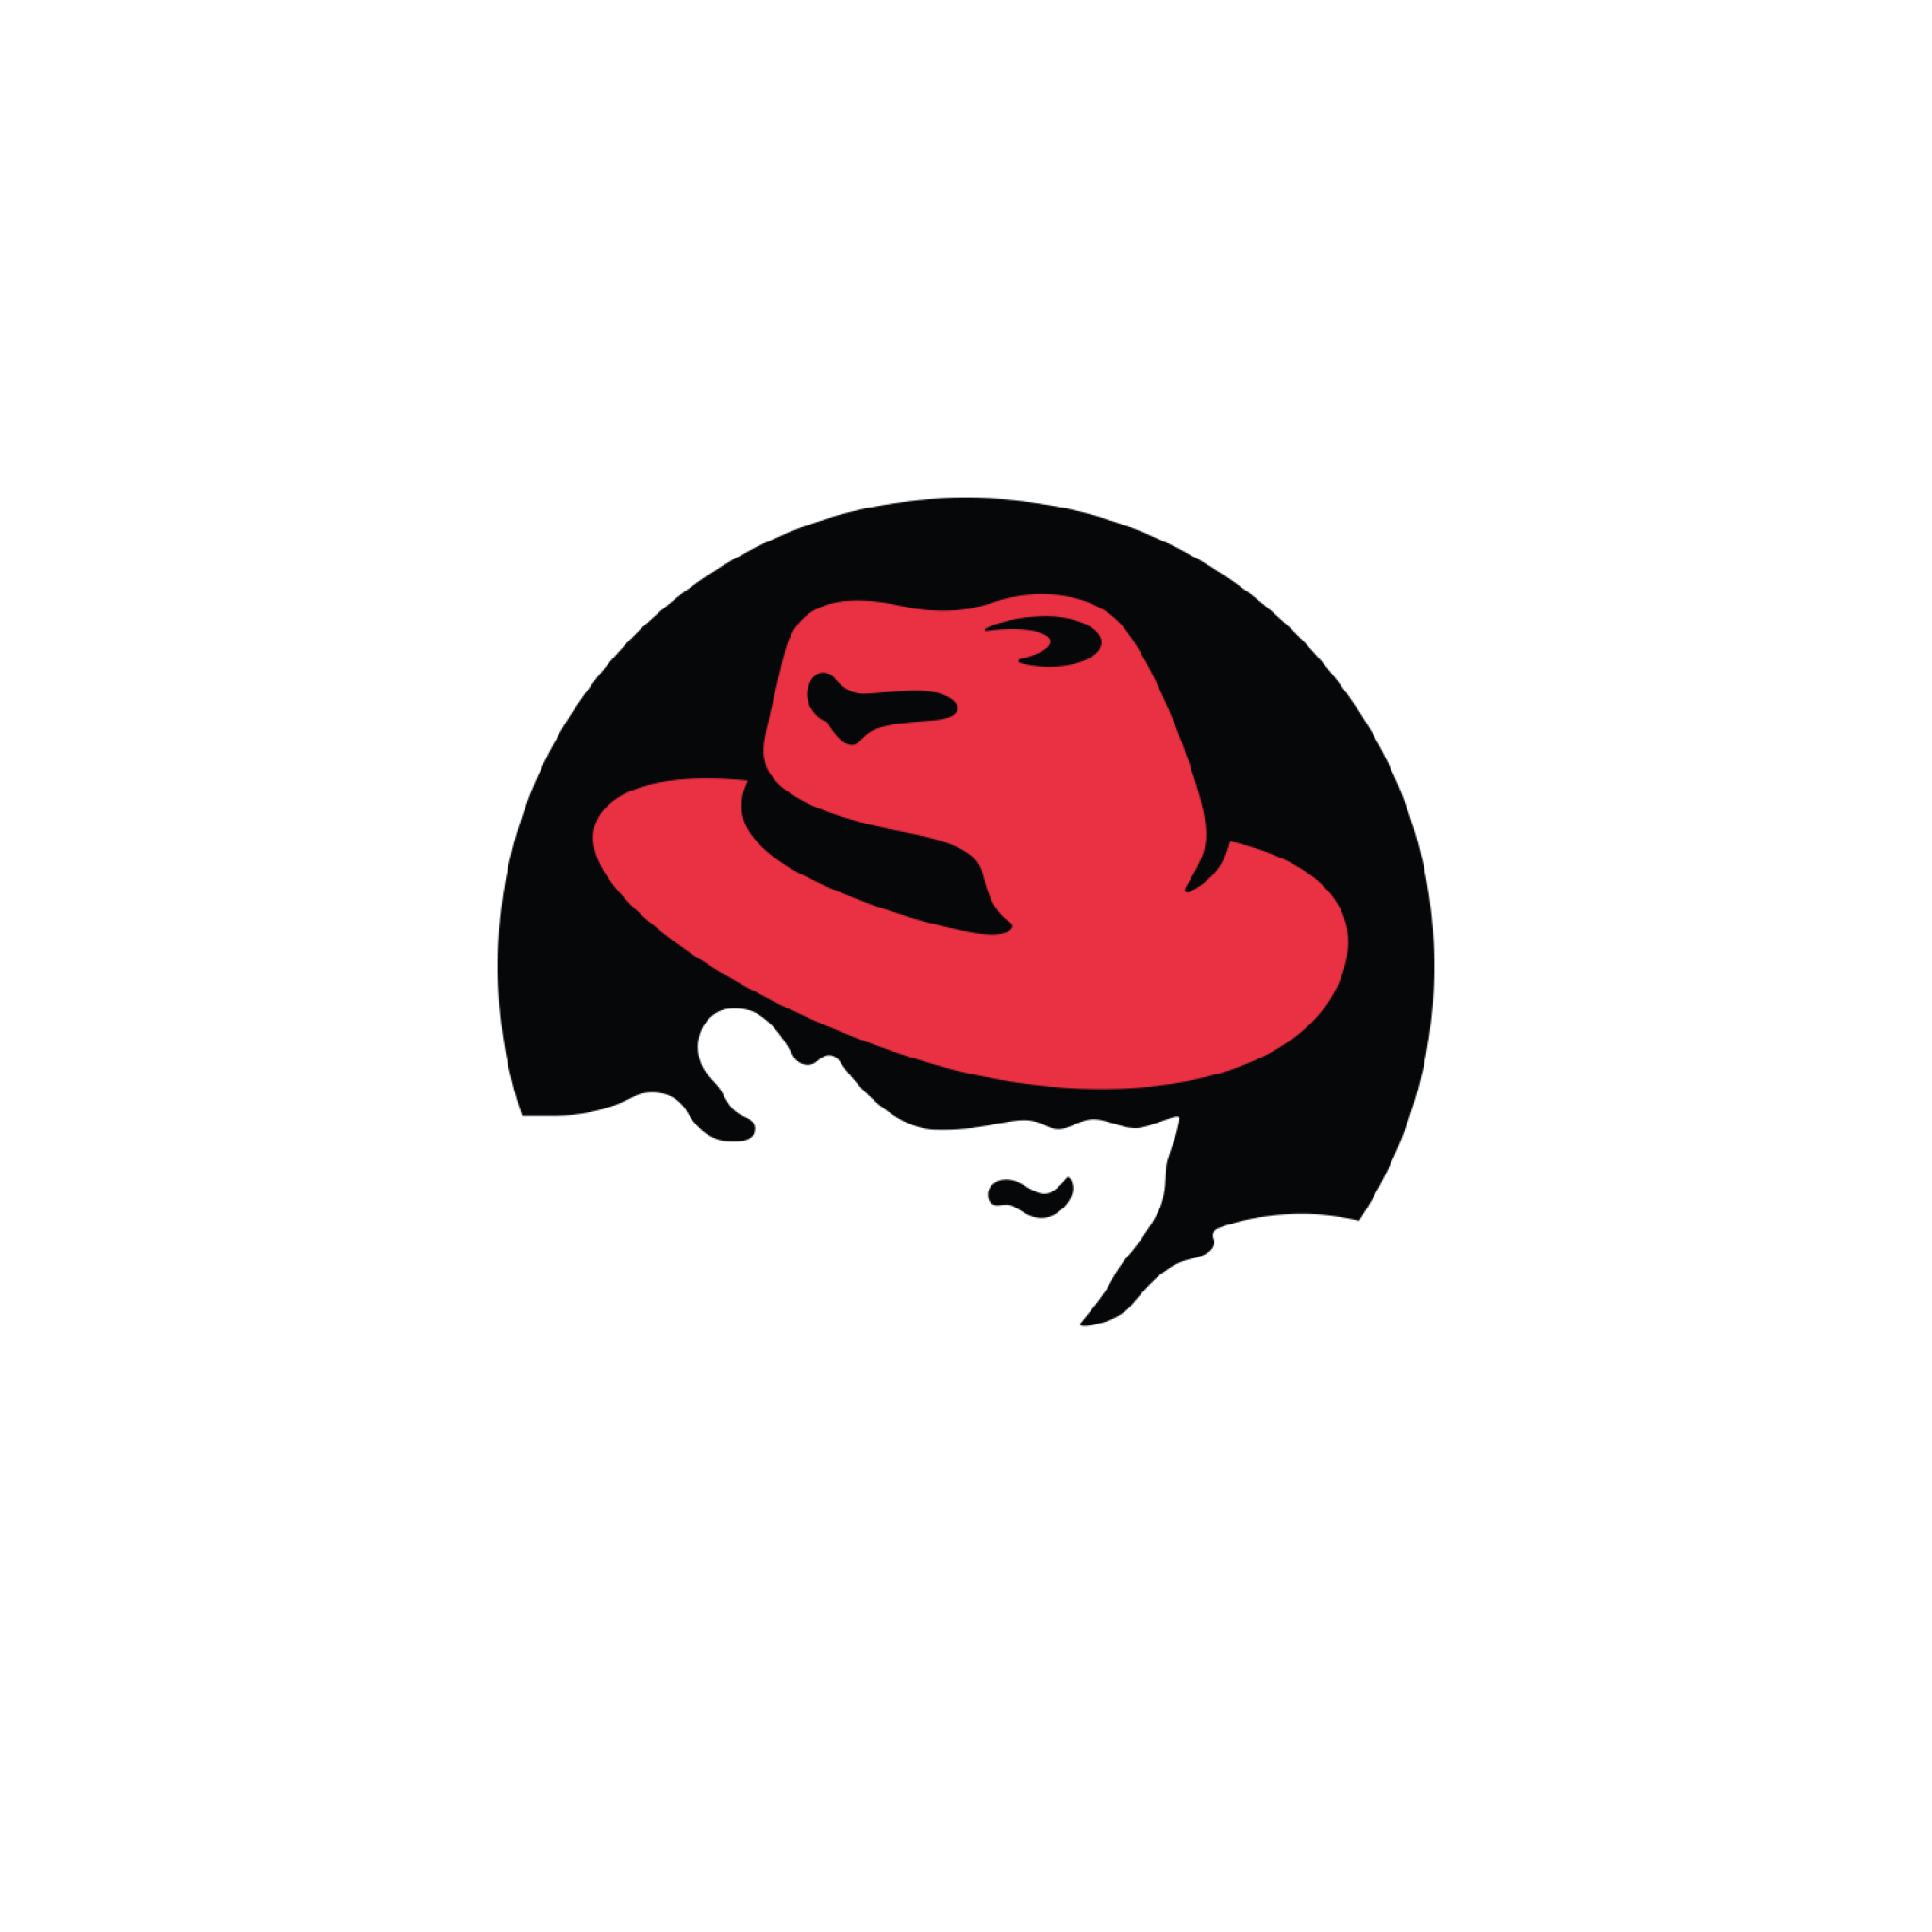 Red hat 2. Red hat логотип. Дистрибутив Red hat. Red hat 9.0. Лого Red hat белый.